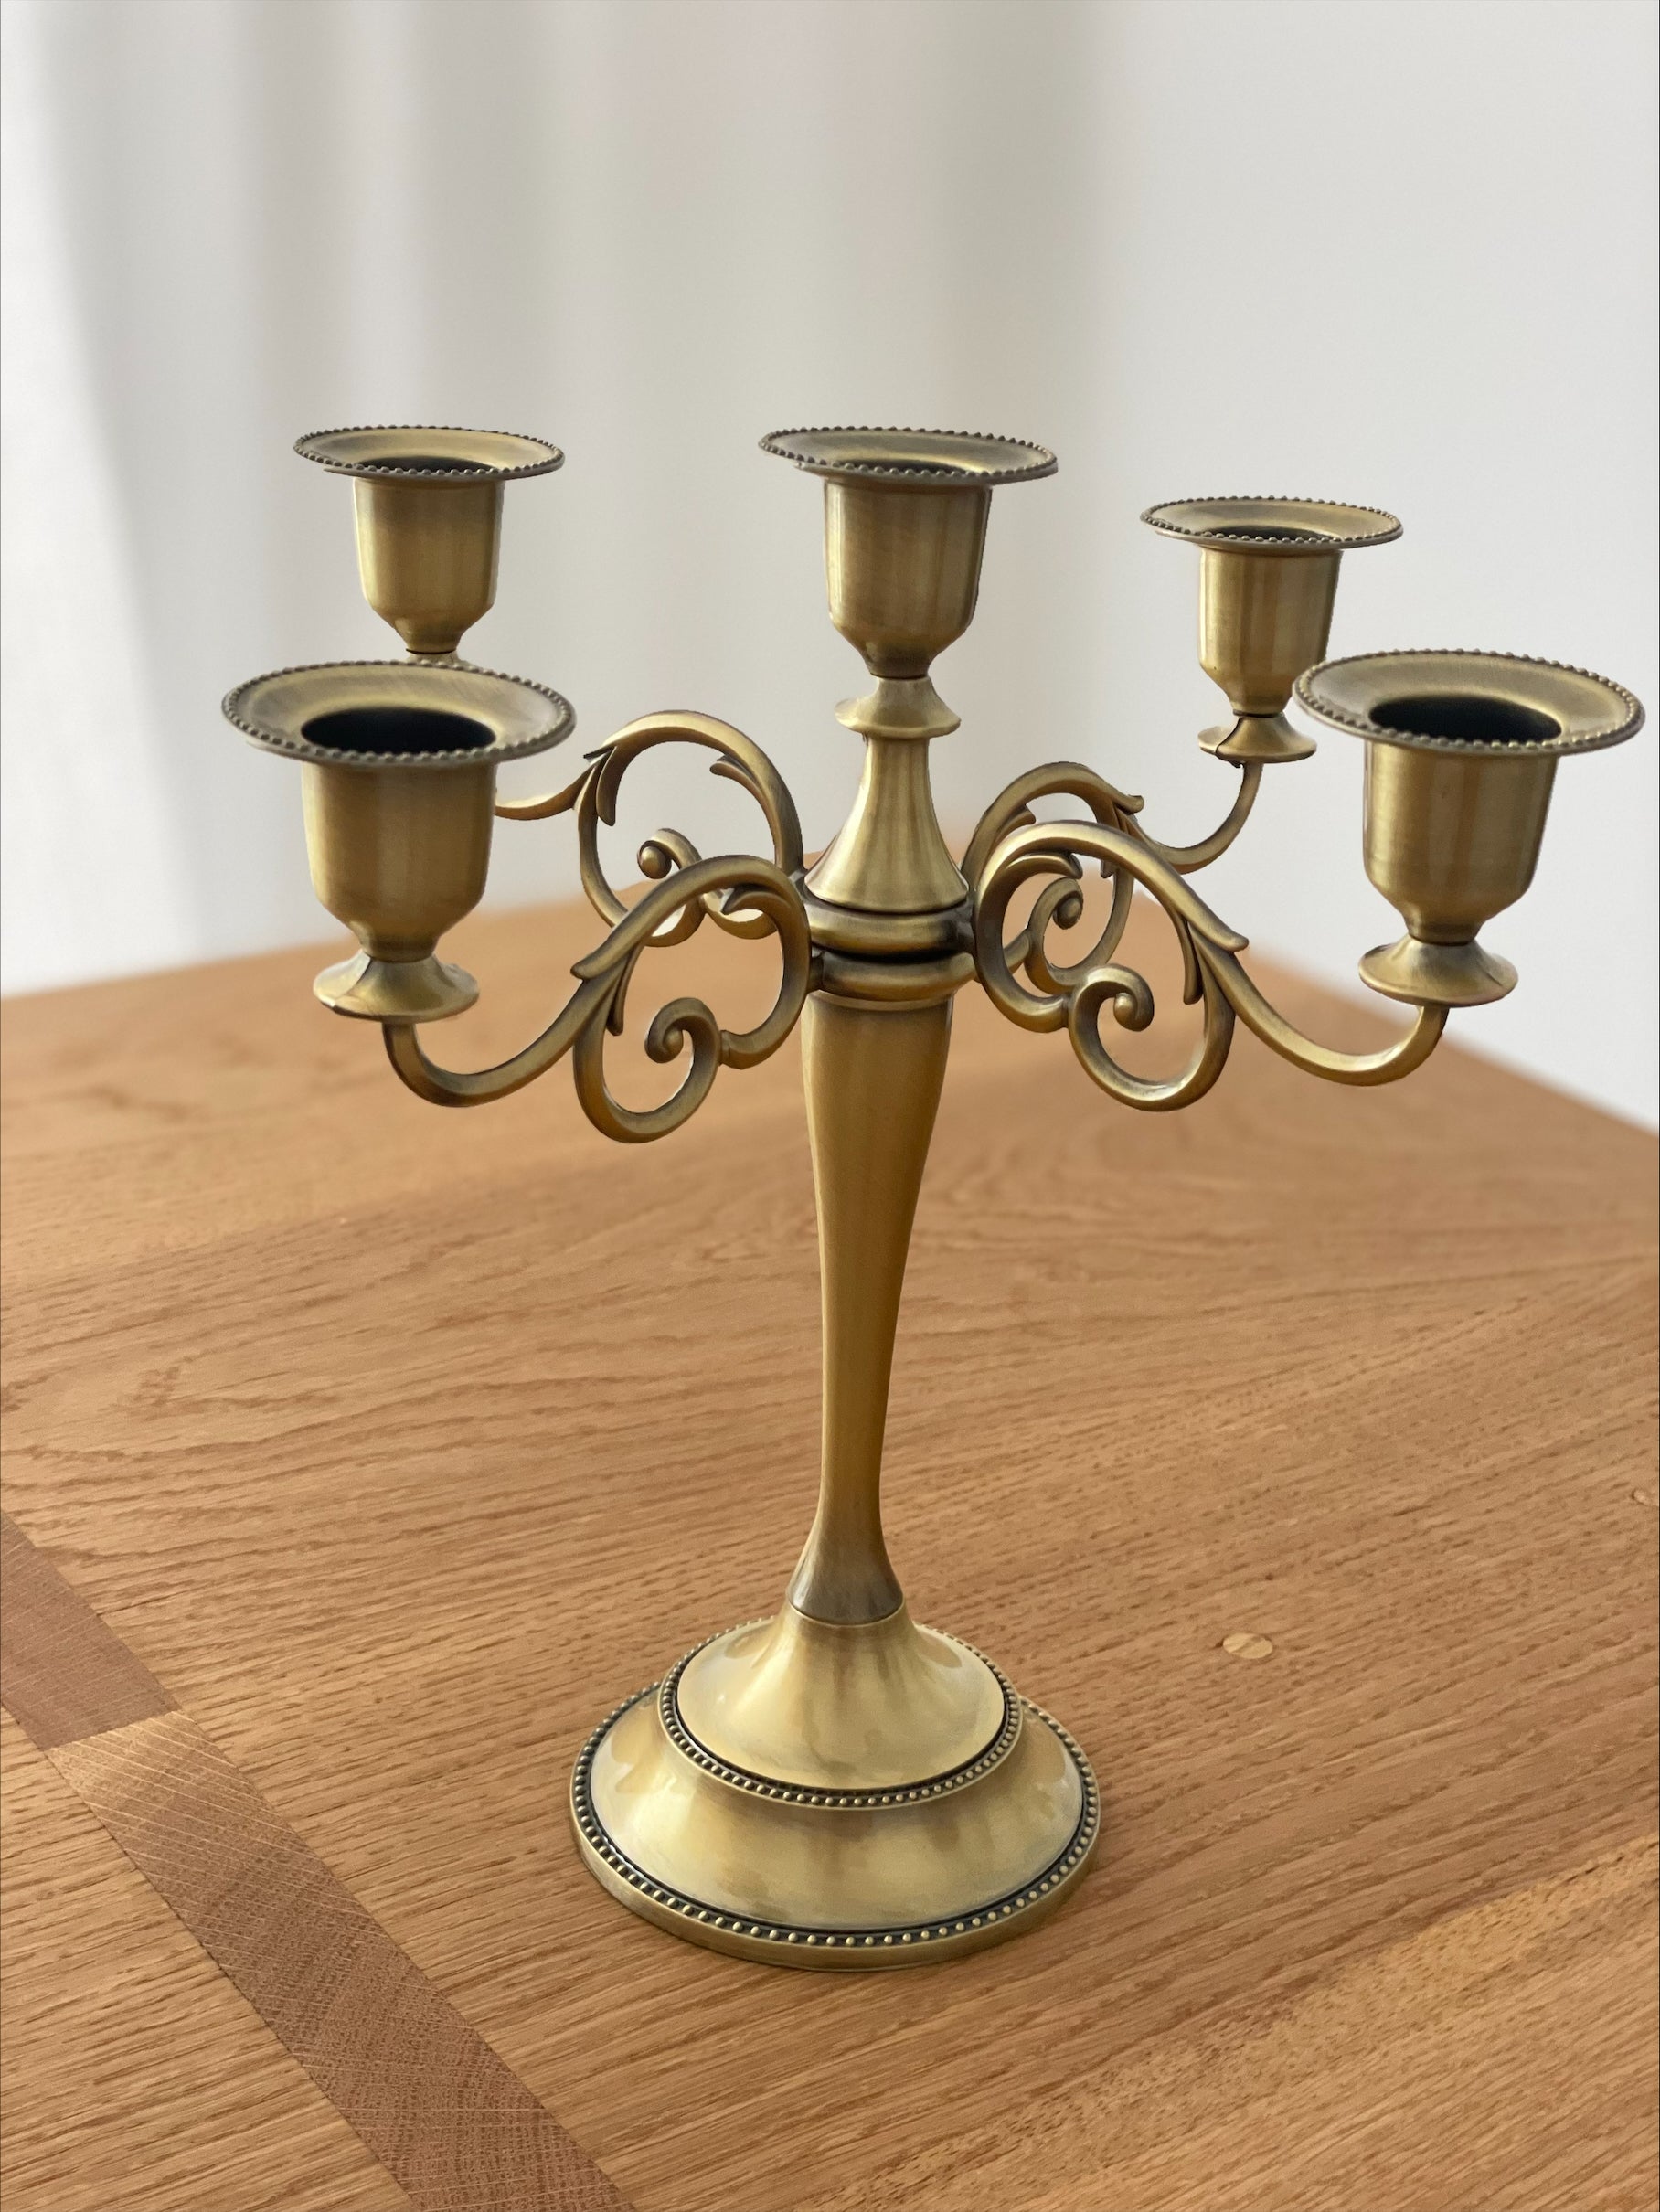 Gold Candelabra for Hire | For Love & Living Gold Coast Weddings & Events